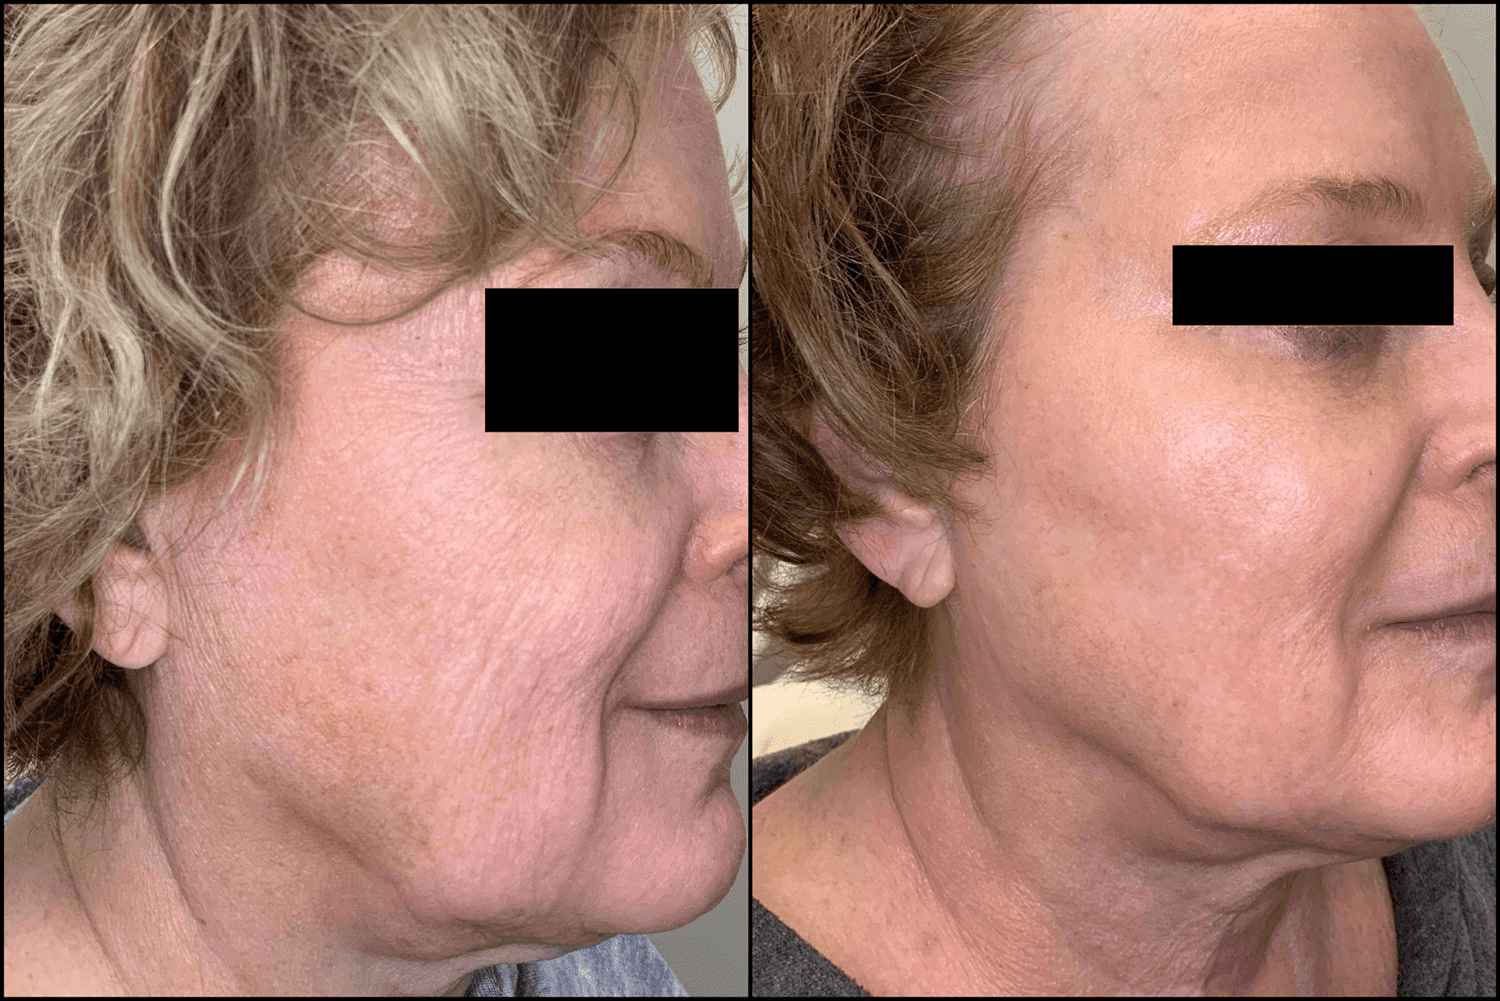 Aerolase Neo Elite Rejuvenation before and after results from profile view